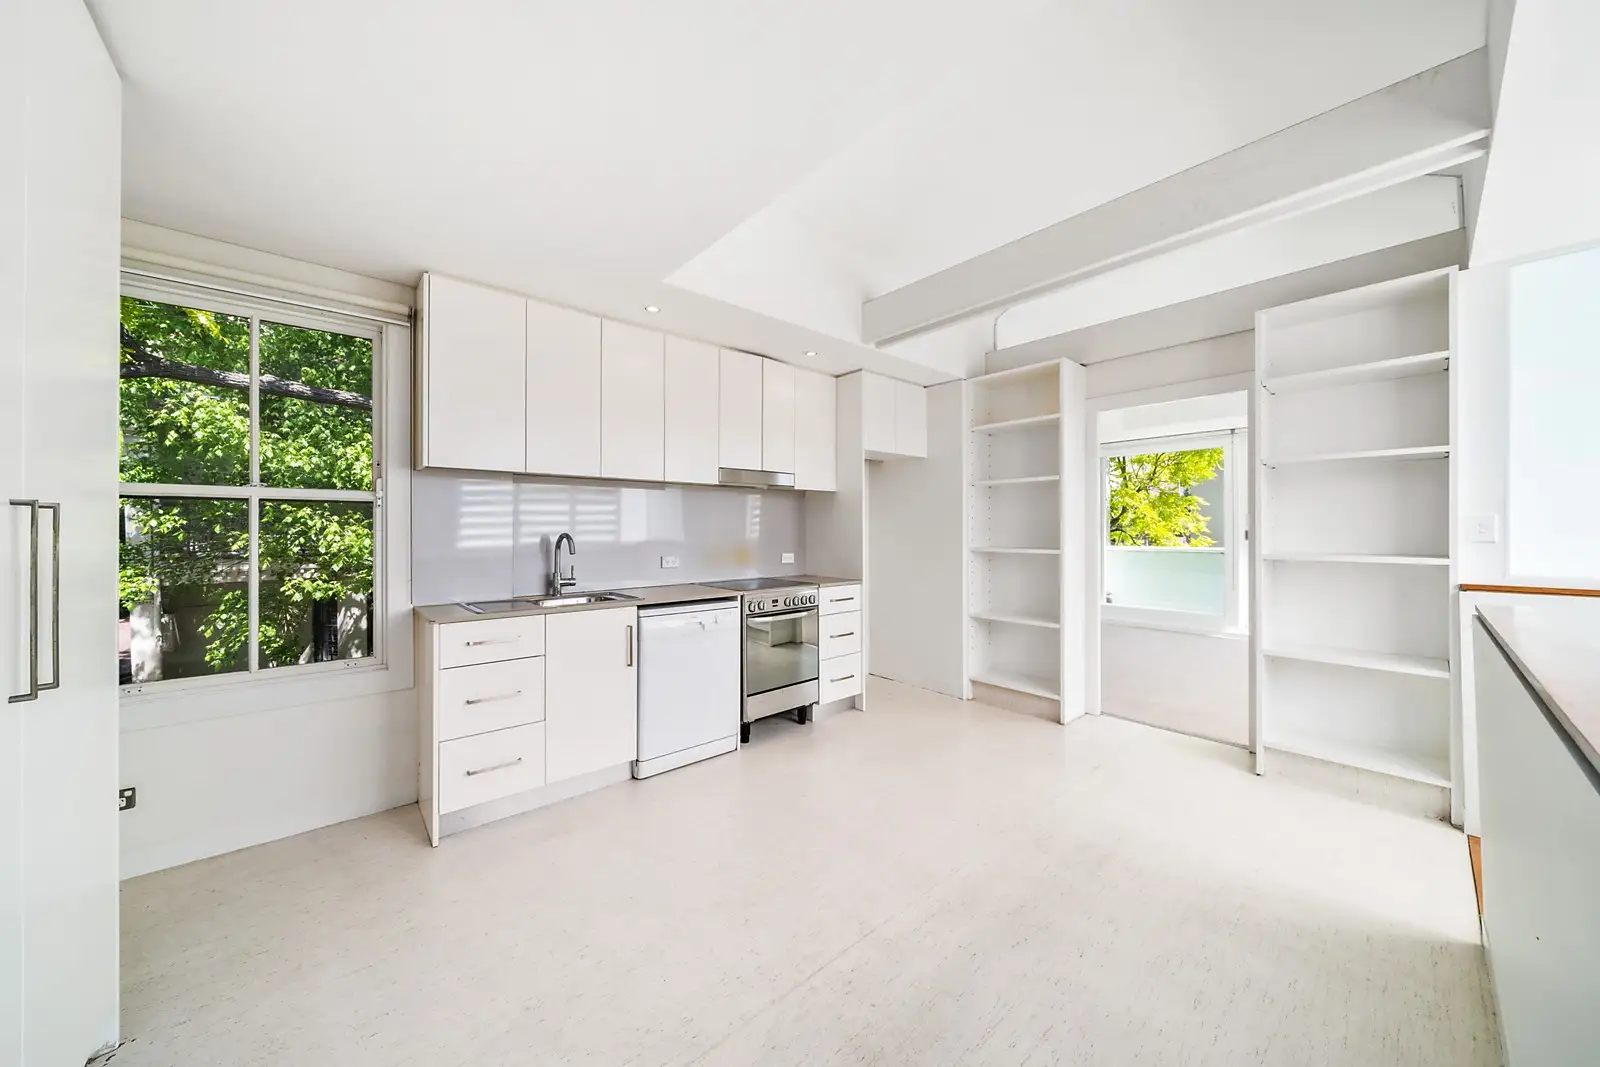 18 Glebe Street, Edgecliff Leased by Sydney Sotheby's International Realty - image 3